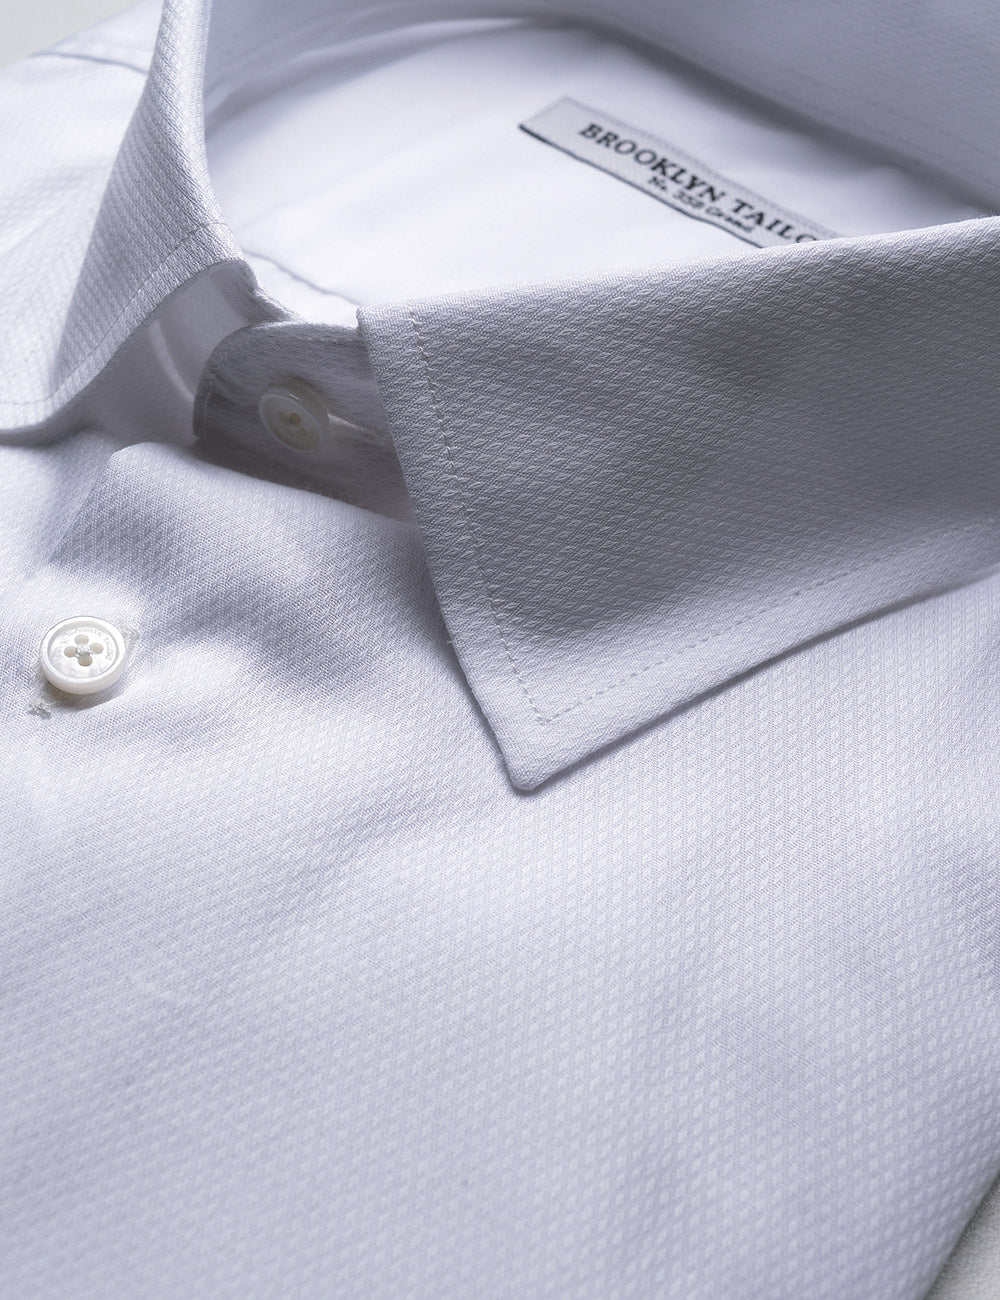 Detail of French Cuff Tuxedo Shirt With Removable Buttons - White Dobby showing fabric texture and collar